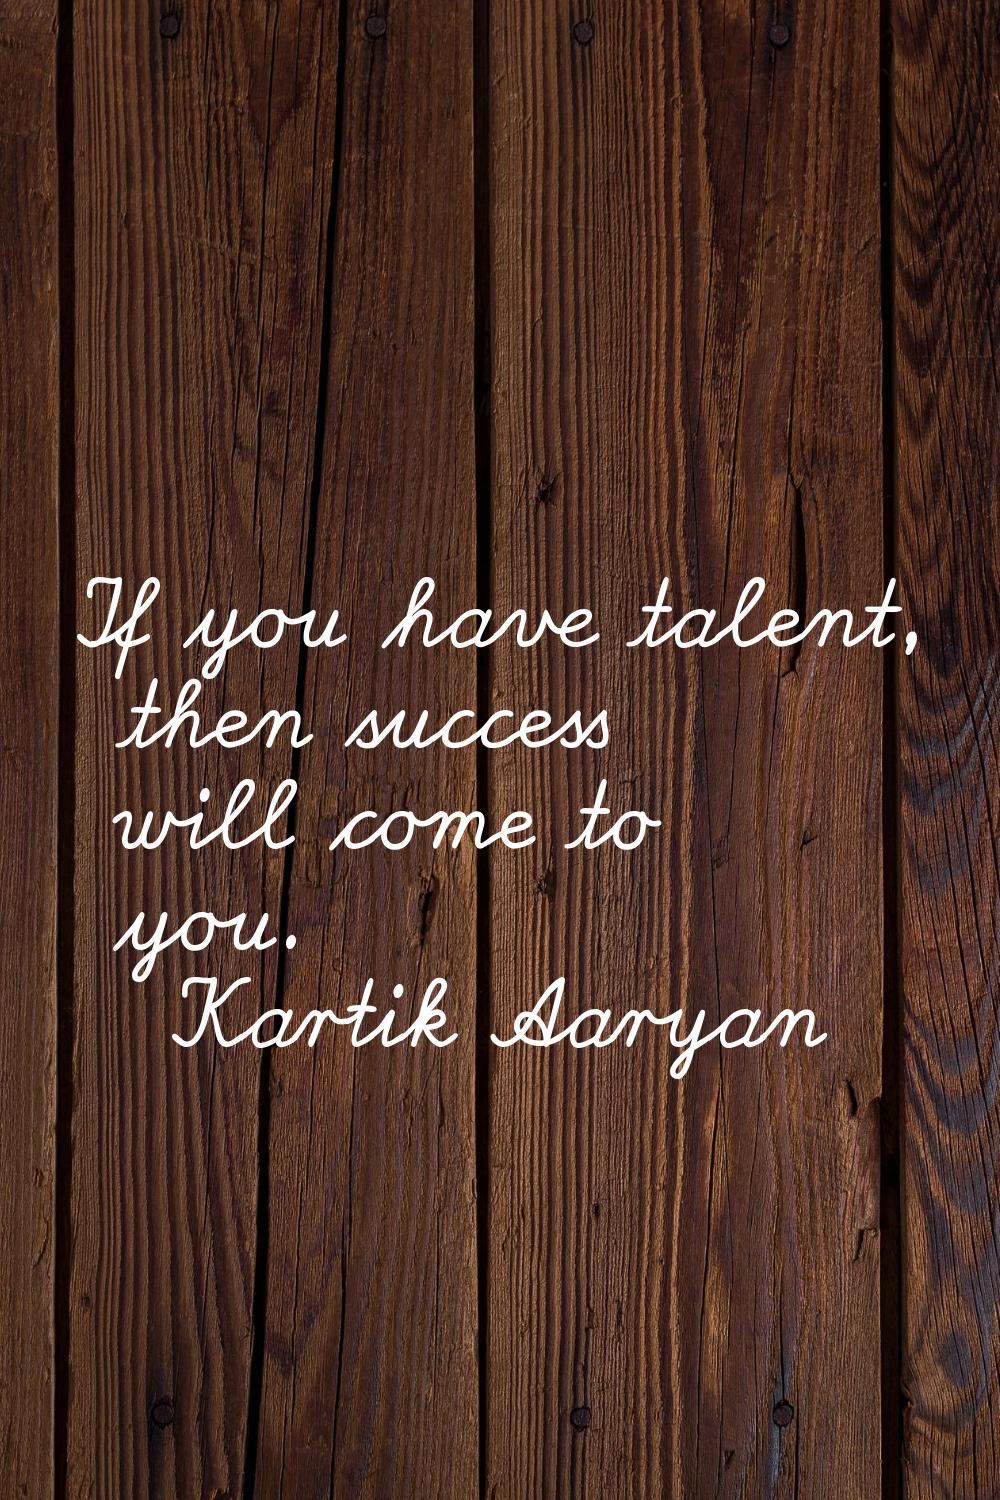 If you have talent, then success will come to you.